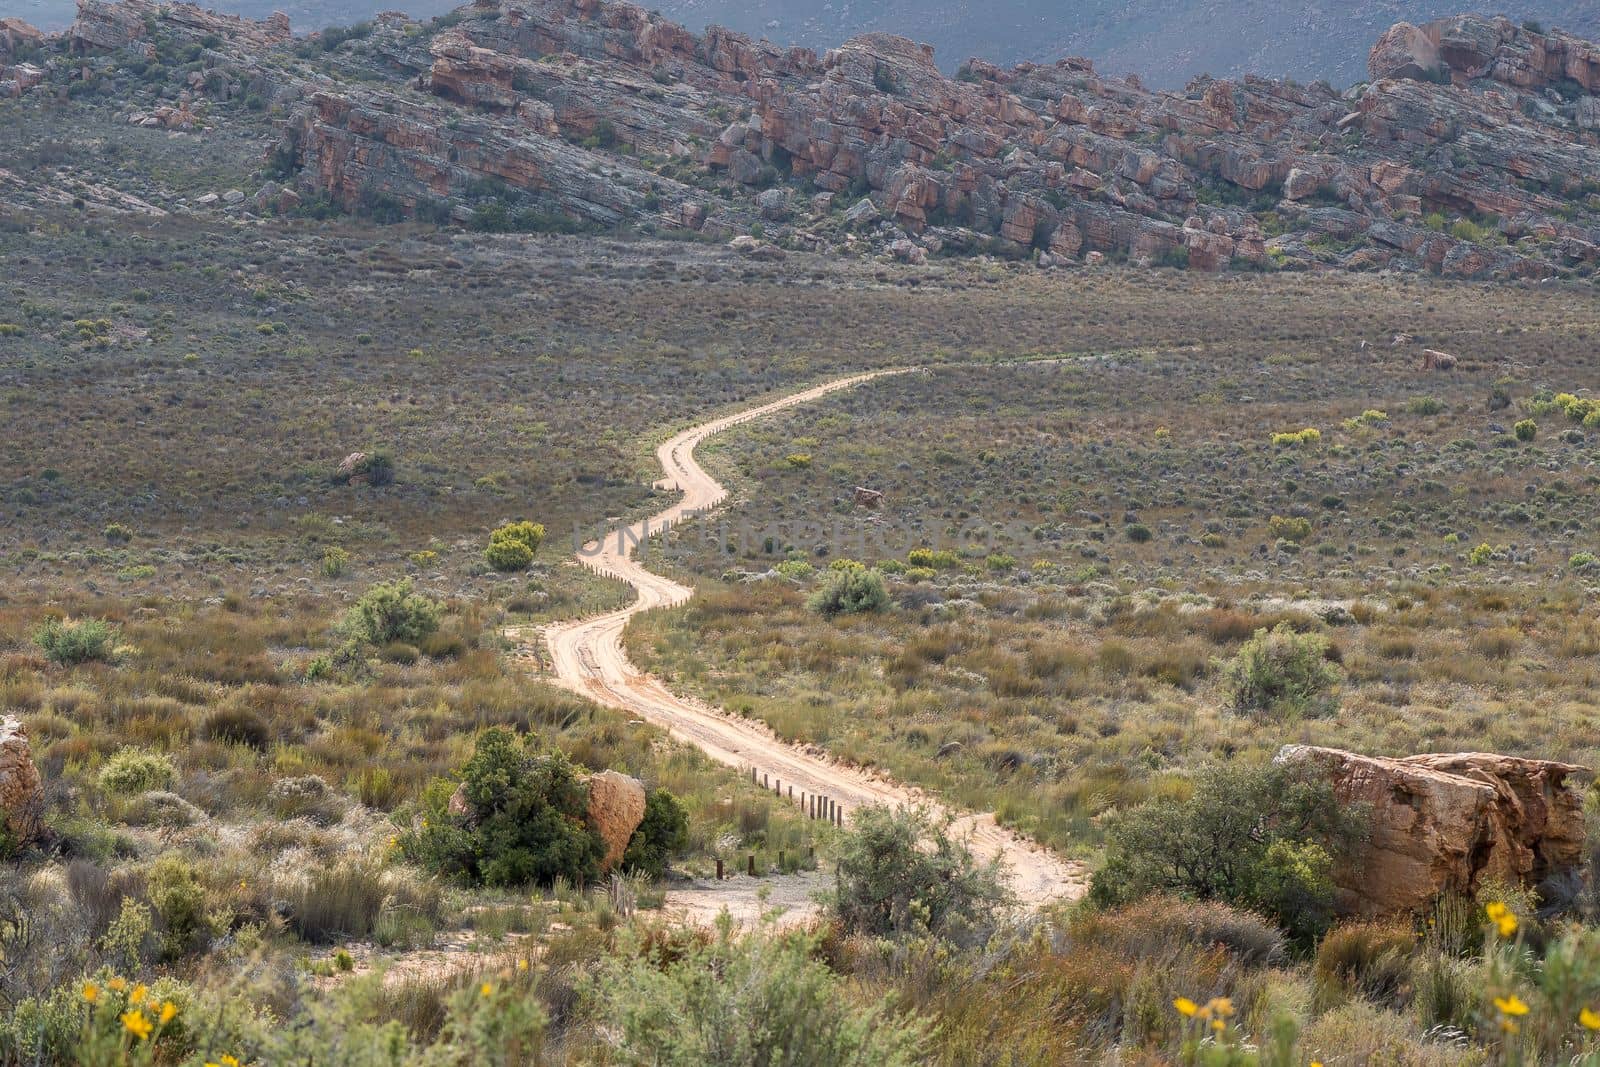 The road from the entrance gate to the Stadsaal Caves in the Western Cape Cederberg